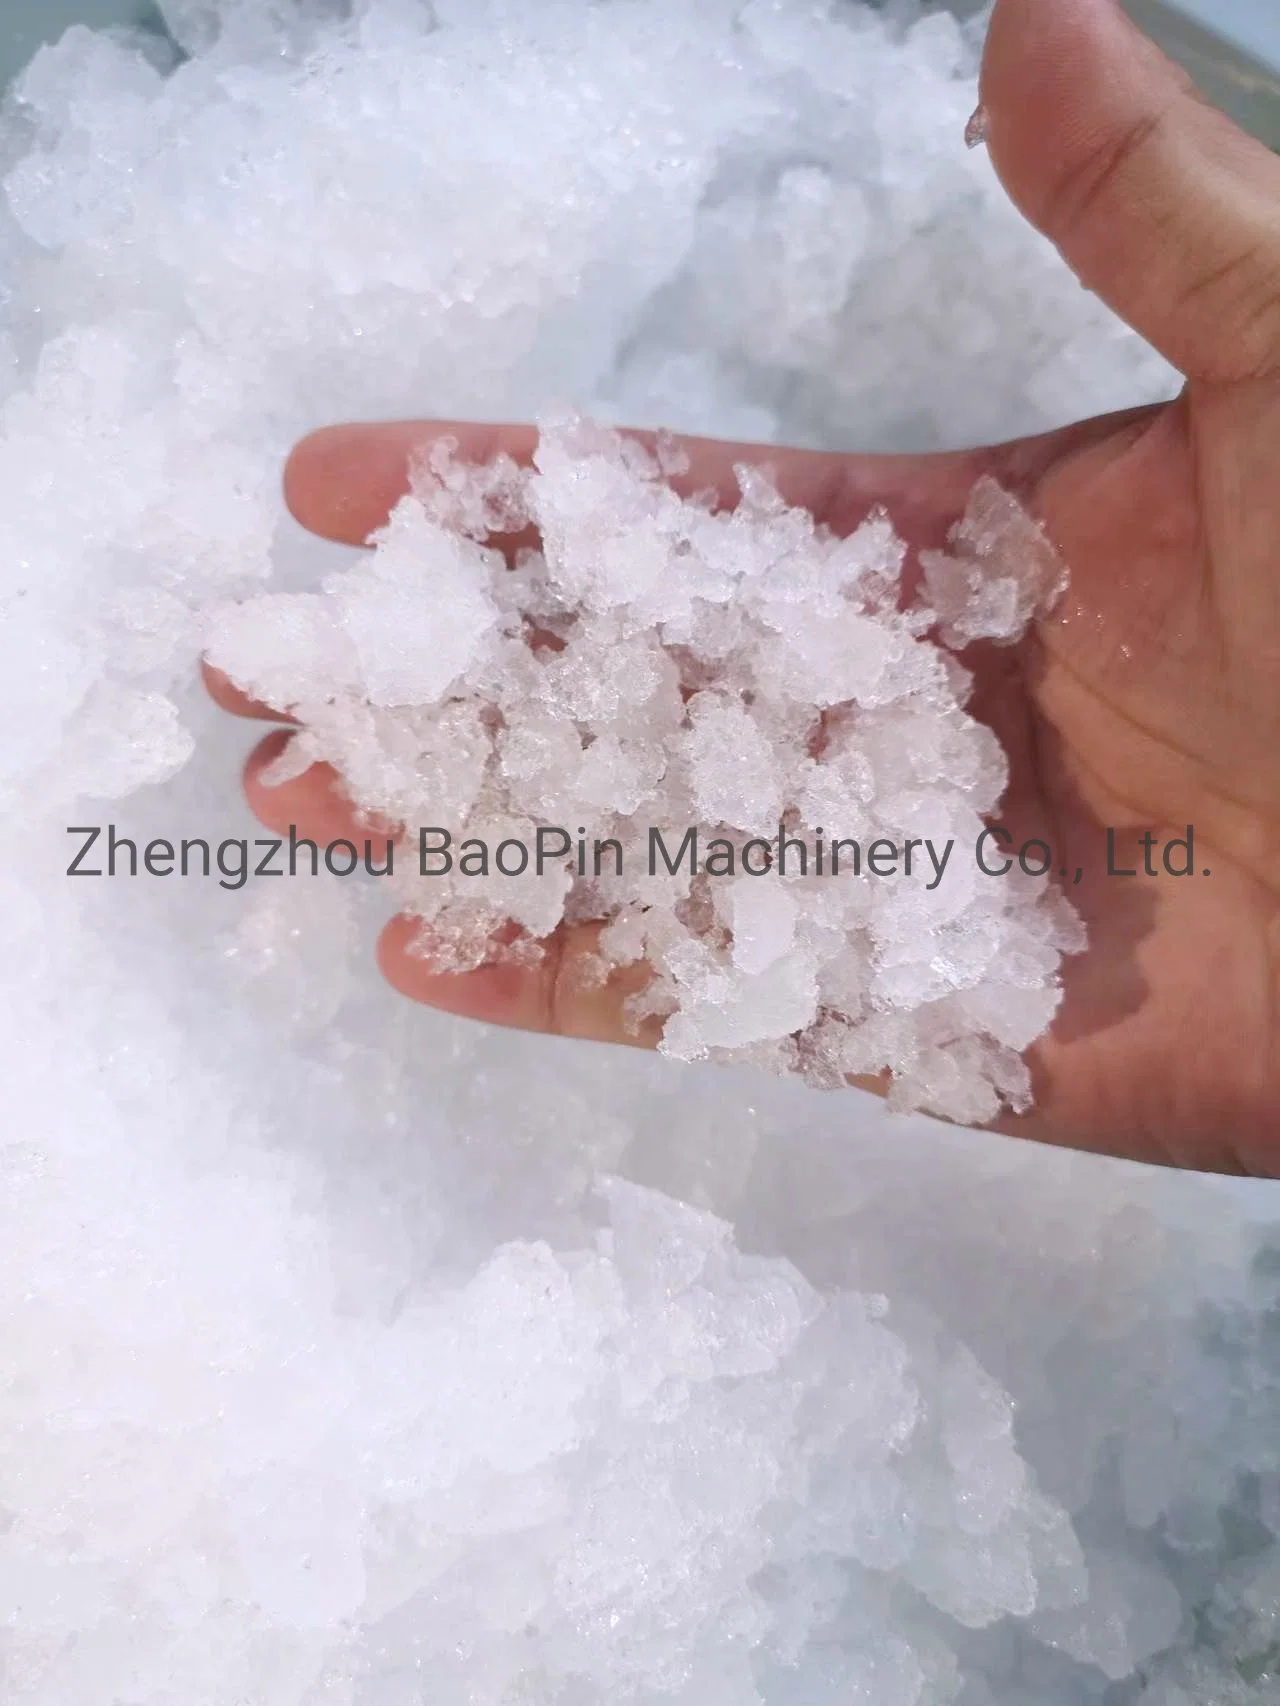 China Baopin Factory 200kg Daily Output Commercial Used Crushed Nugget Ice Maker Machine